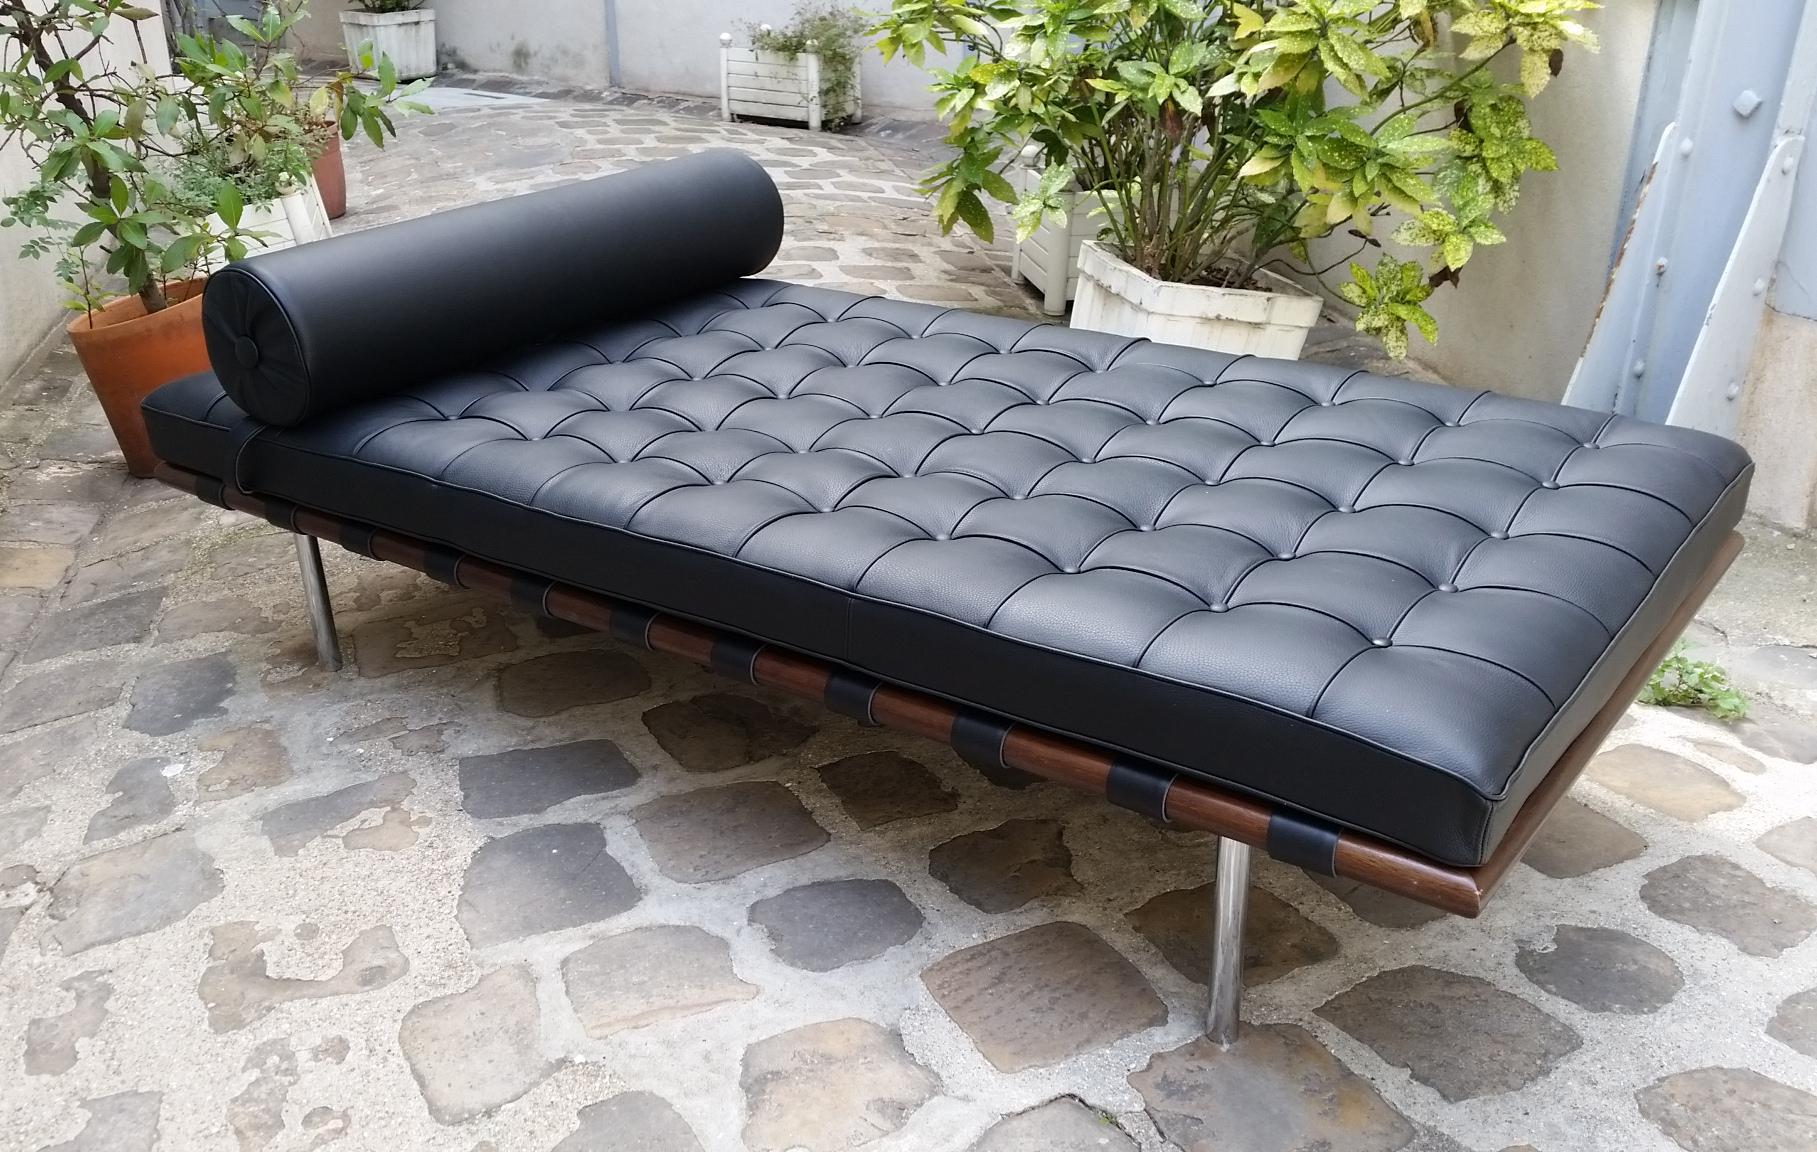 Barcelona Daybed by Mies Van der Rohe - KNOLL Editor

EDITION: 2010

FINISH: GRAIN BLACK LEATHER / WOOD / CHROME STEEL

DIMENSIONS: H: 43 cm Lar. 98 Long. 196 cm

The Daybed / daybed Barcelona Daybed harmonizes with the famous Barcelona armchair,